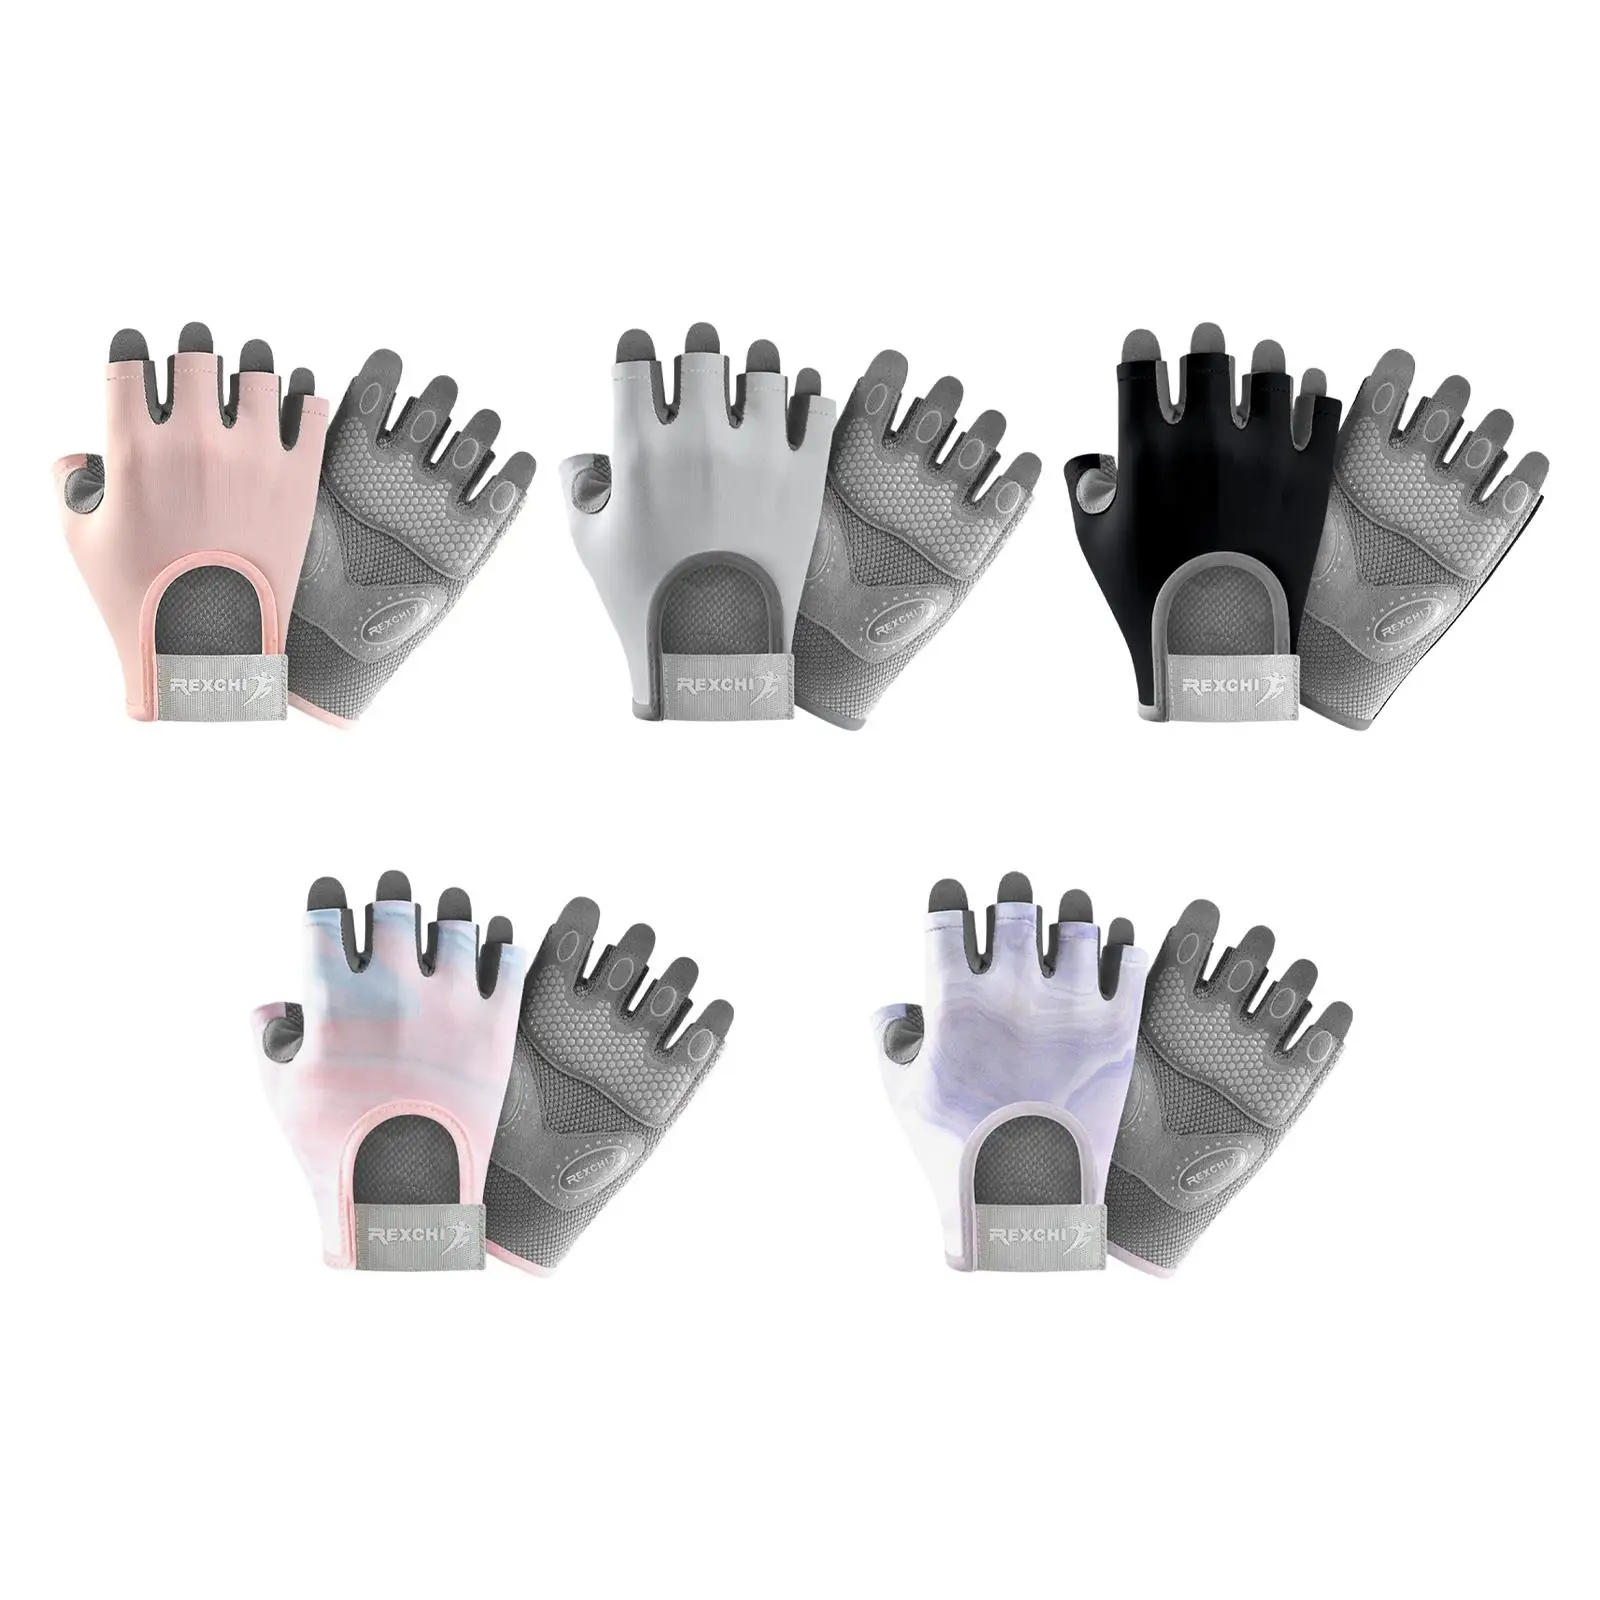 Cycling Bike Gloves Anti Slip Protective Palm Protection Fingerless Mittens